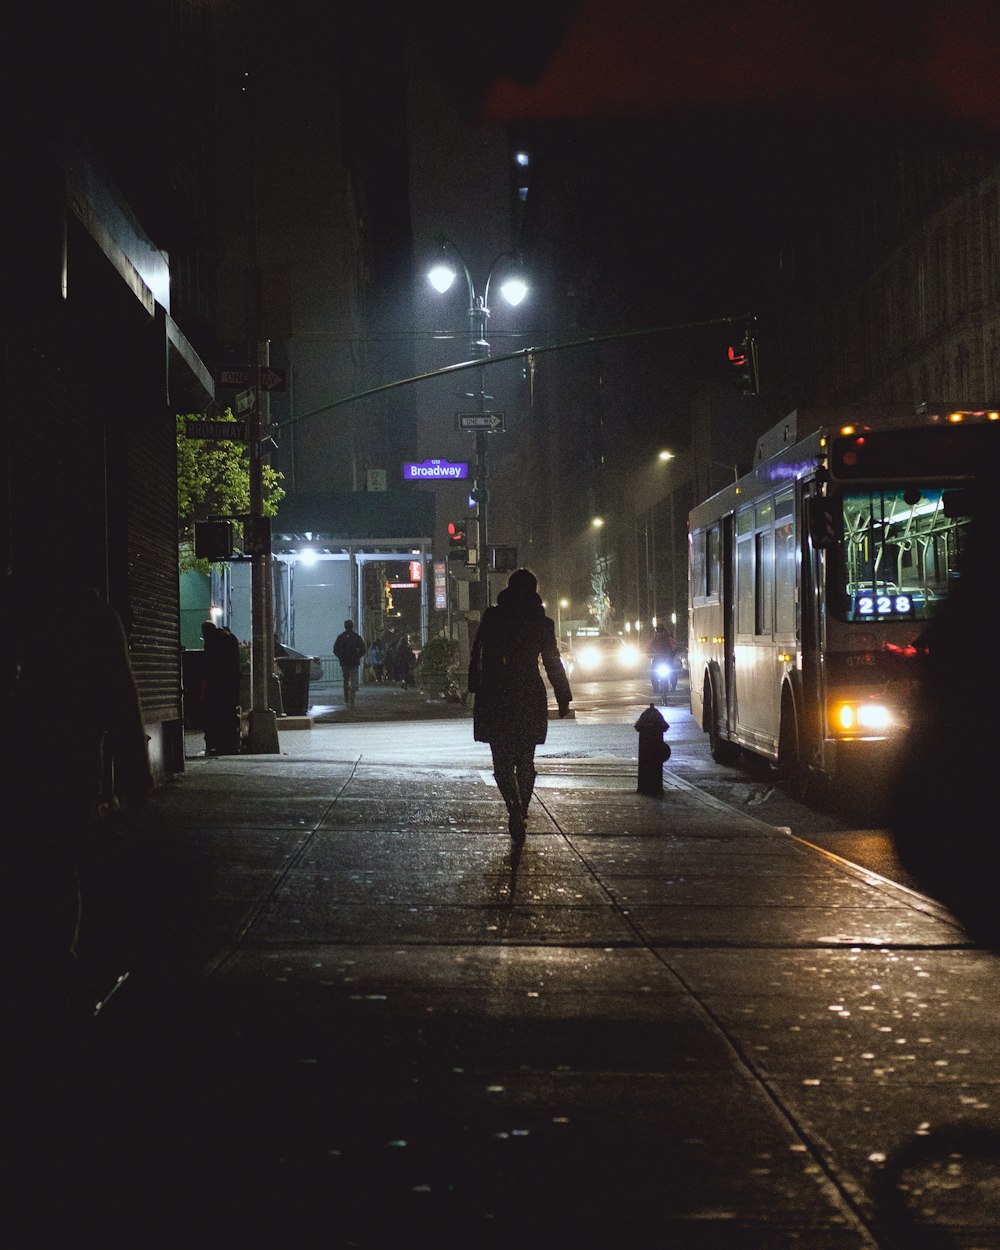 person walking on pathway near bus and vehicles during night time